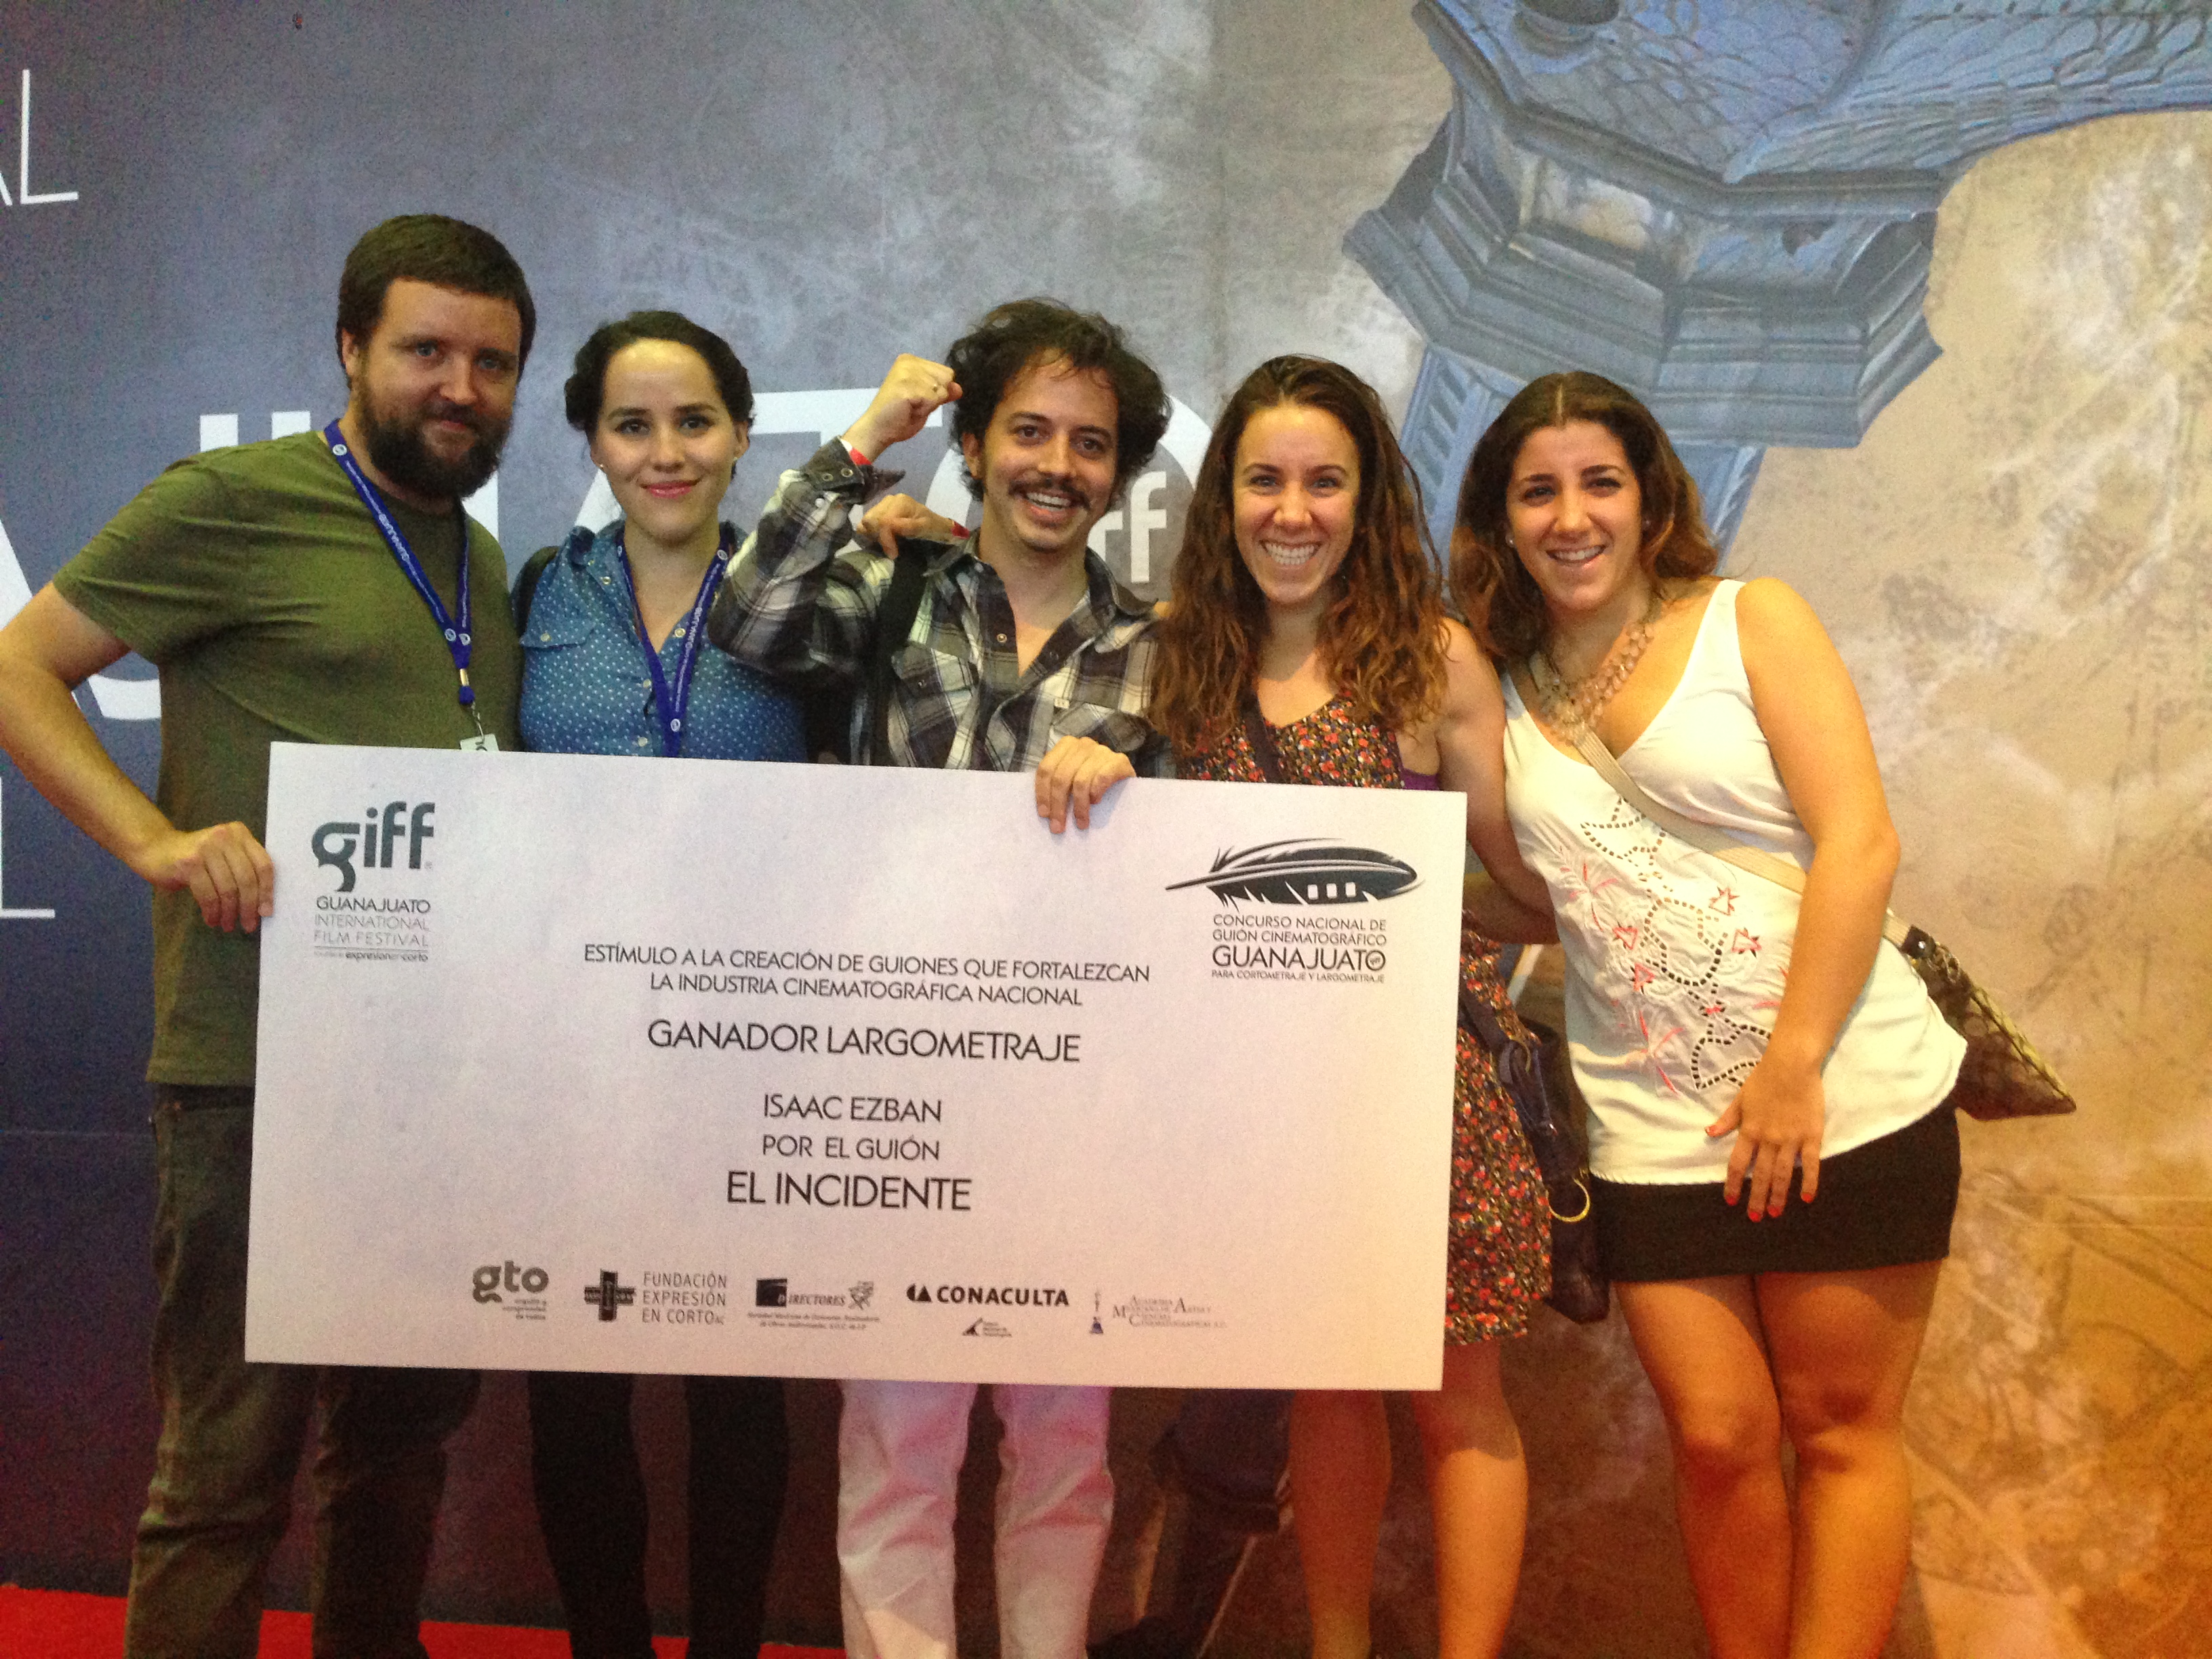 Isaac Ezban winning Best Original Screenplay for a Feature Length Film for THE INCIDENT (still to be filmed on 2013) at GIFF (Guanajuato International Film Festival / July 2013